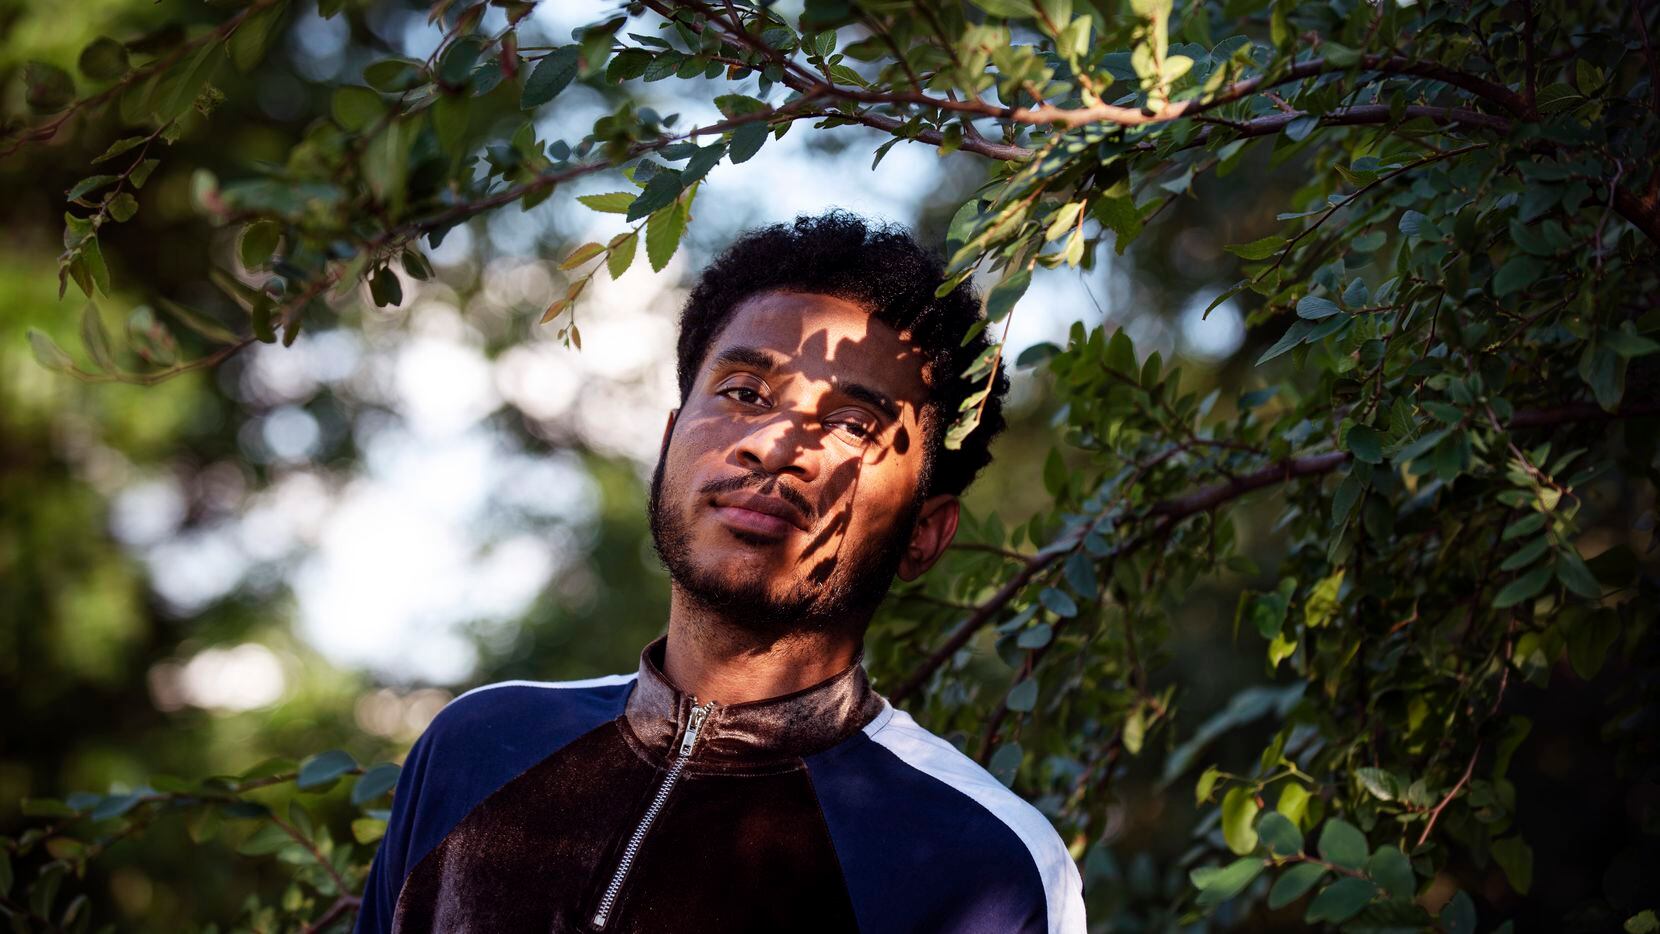 Brandon Jackson, 31, started writing poetry to process the abuse and isolation he...